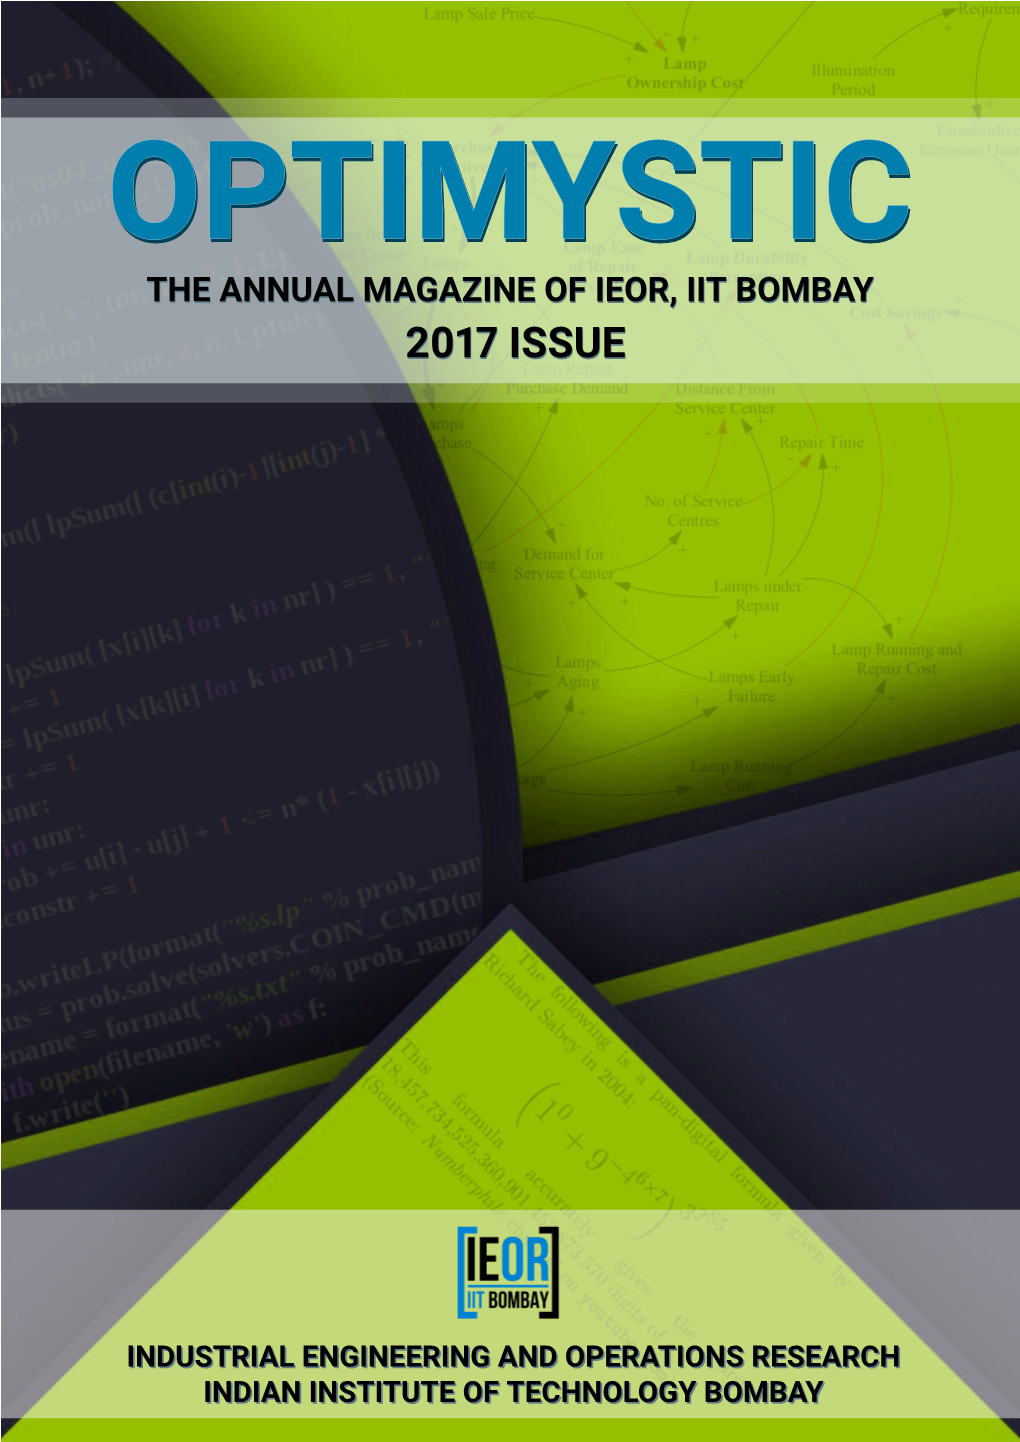 The Annual Magazine of Ieor, Iit Bombay 2017 Issue